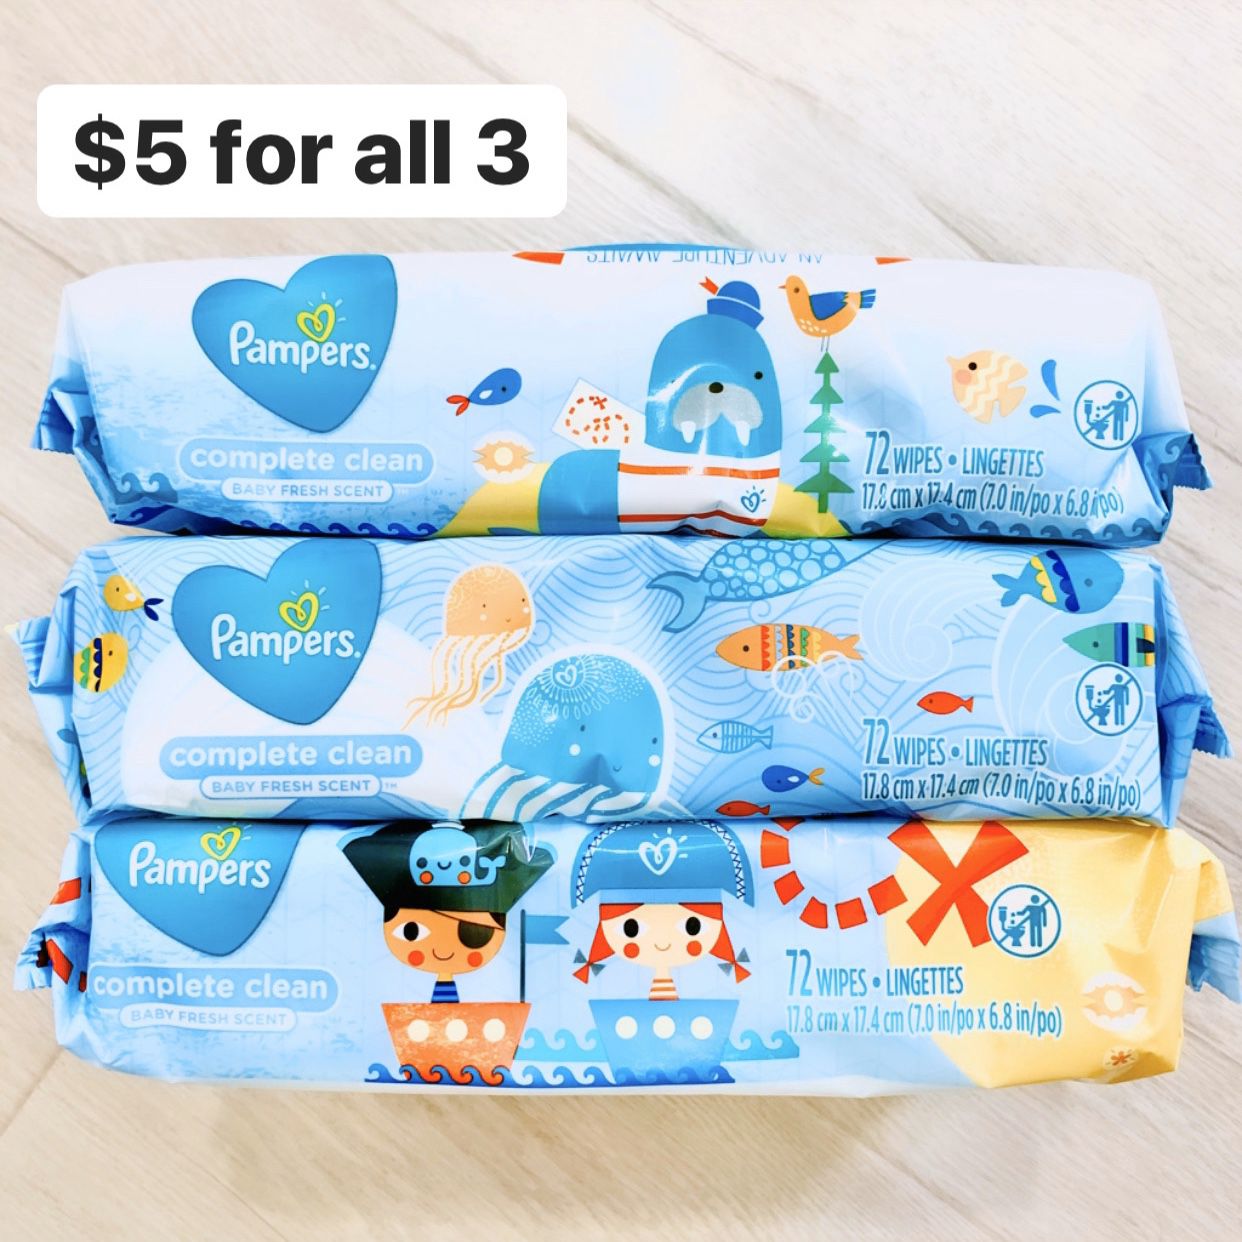 3 Packs Pampers Complete Clean Baby Fresh Scent (216 wipes total) - $5 for all 3